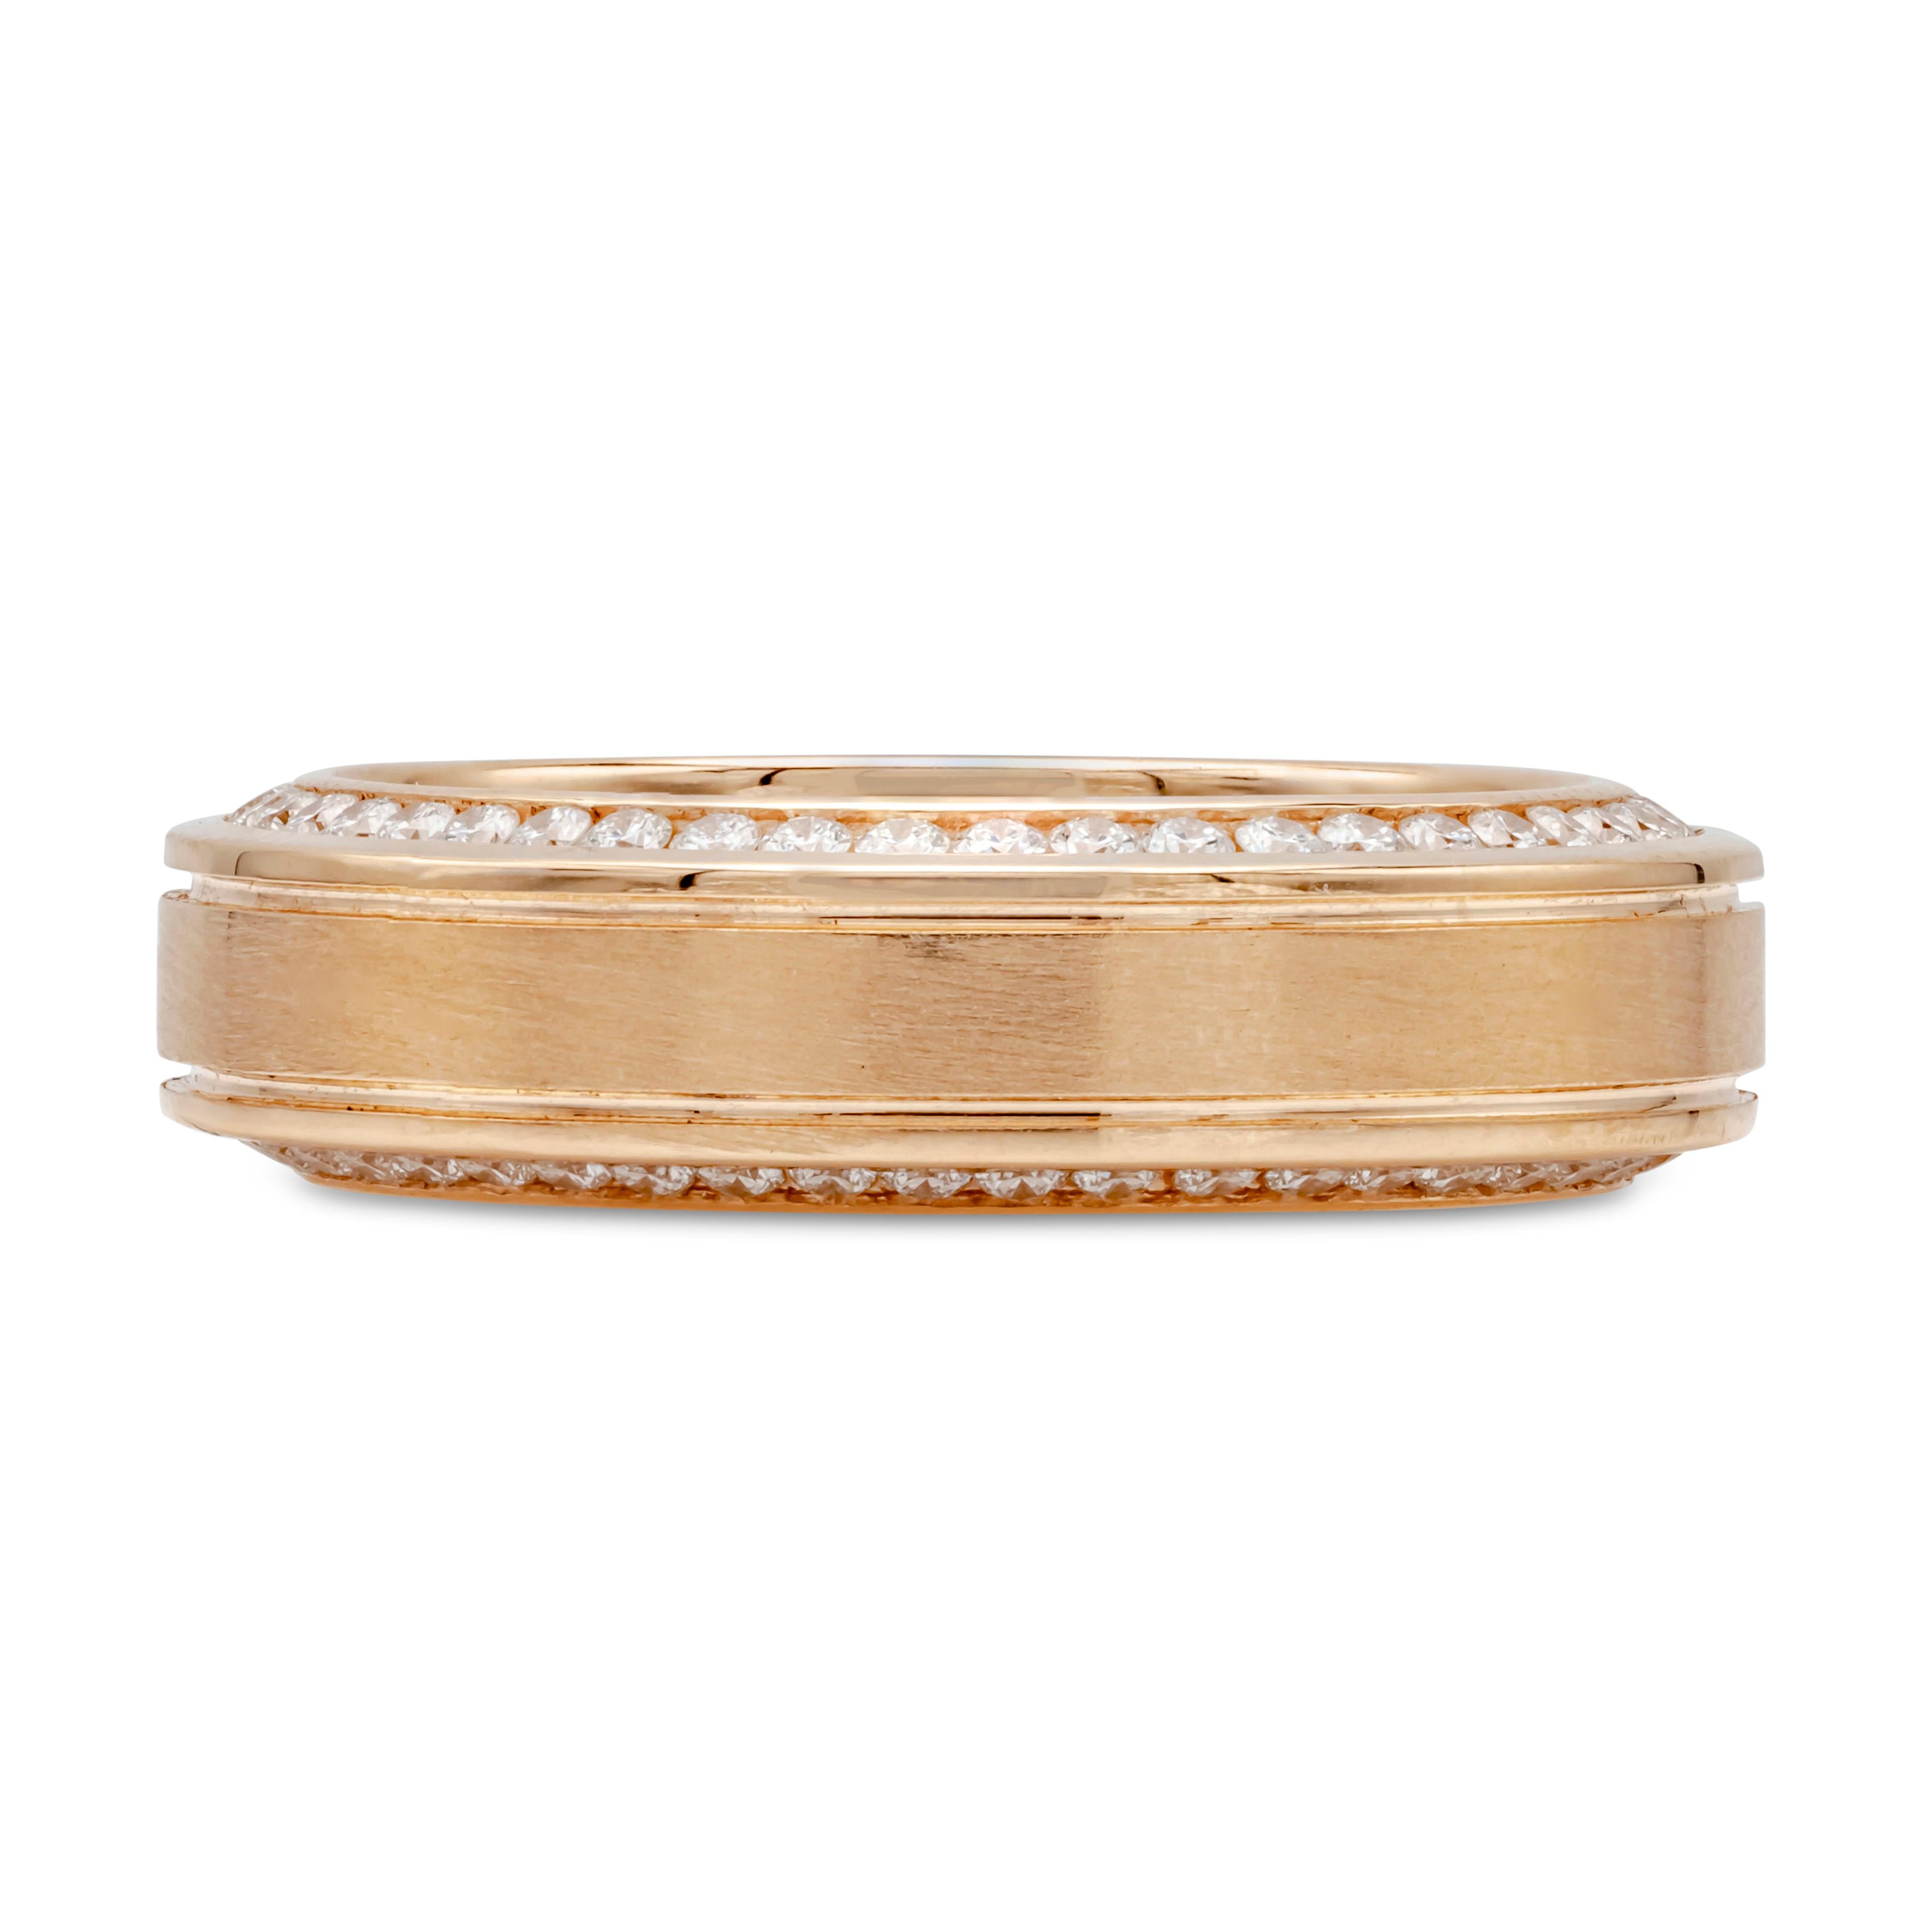 A comfort fit wedding band wrapped with round brilliant diamonds weighing 1.21 carats total; channel set on each side of the ring. Two lines finely-engraved in the middle portion of the ring and made in 18k rose gold. Gorgeous brushed inlay finish.